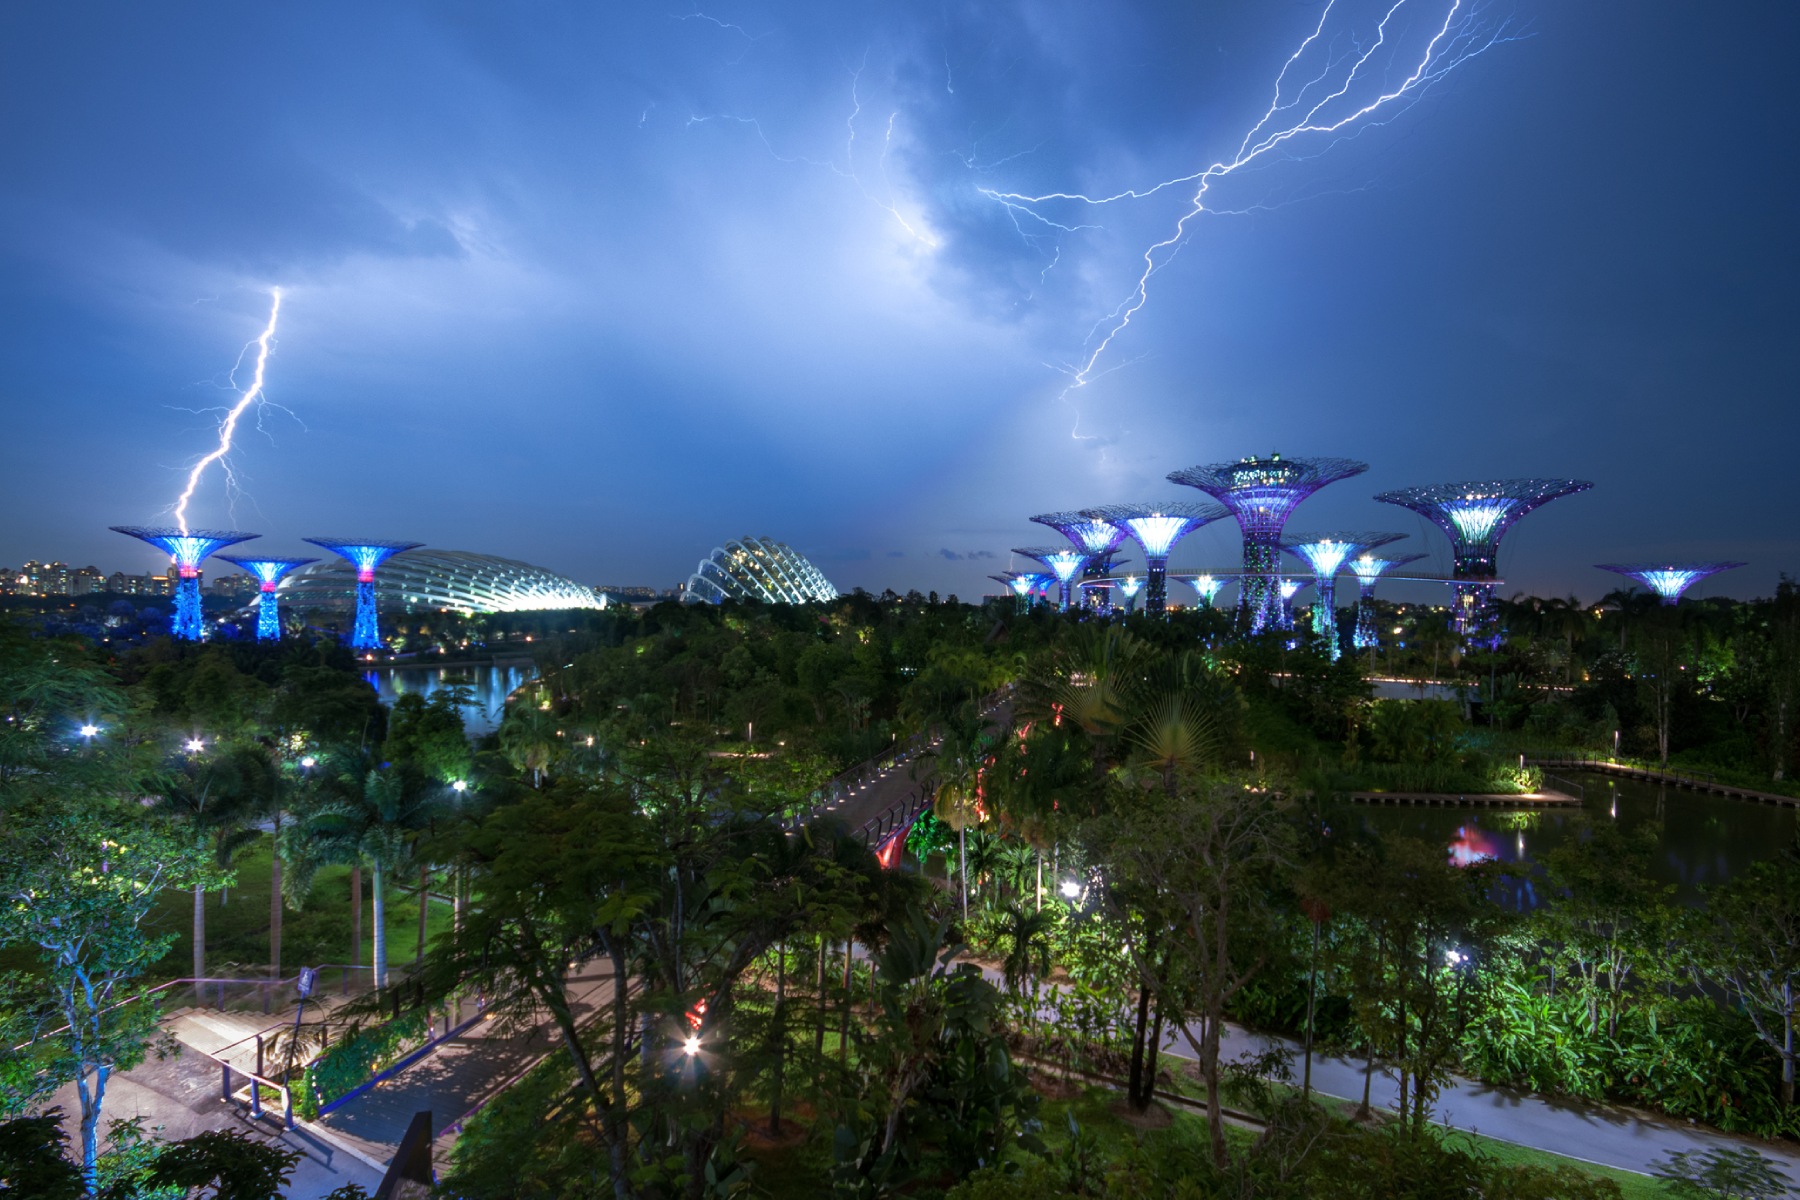 Lightening bolts in the sky during a thunderstorm over Garden by the Bay in Singapore.